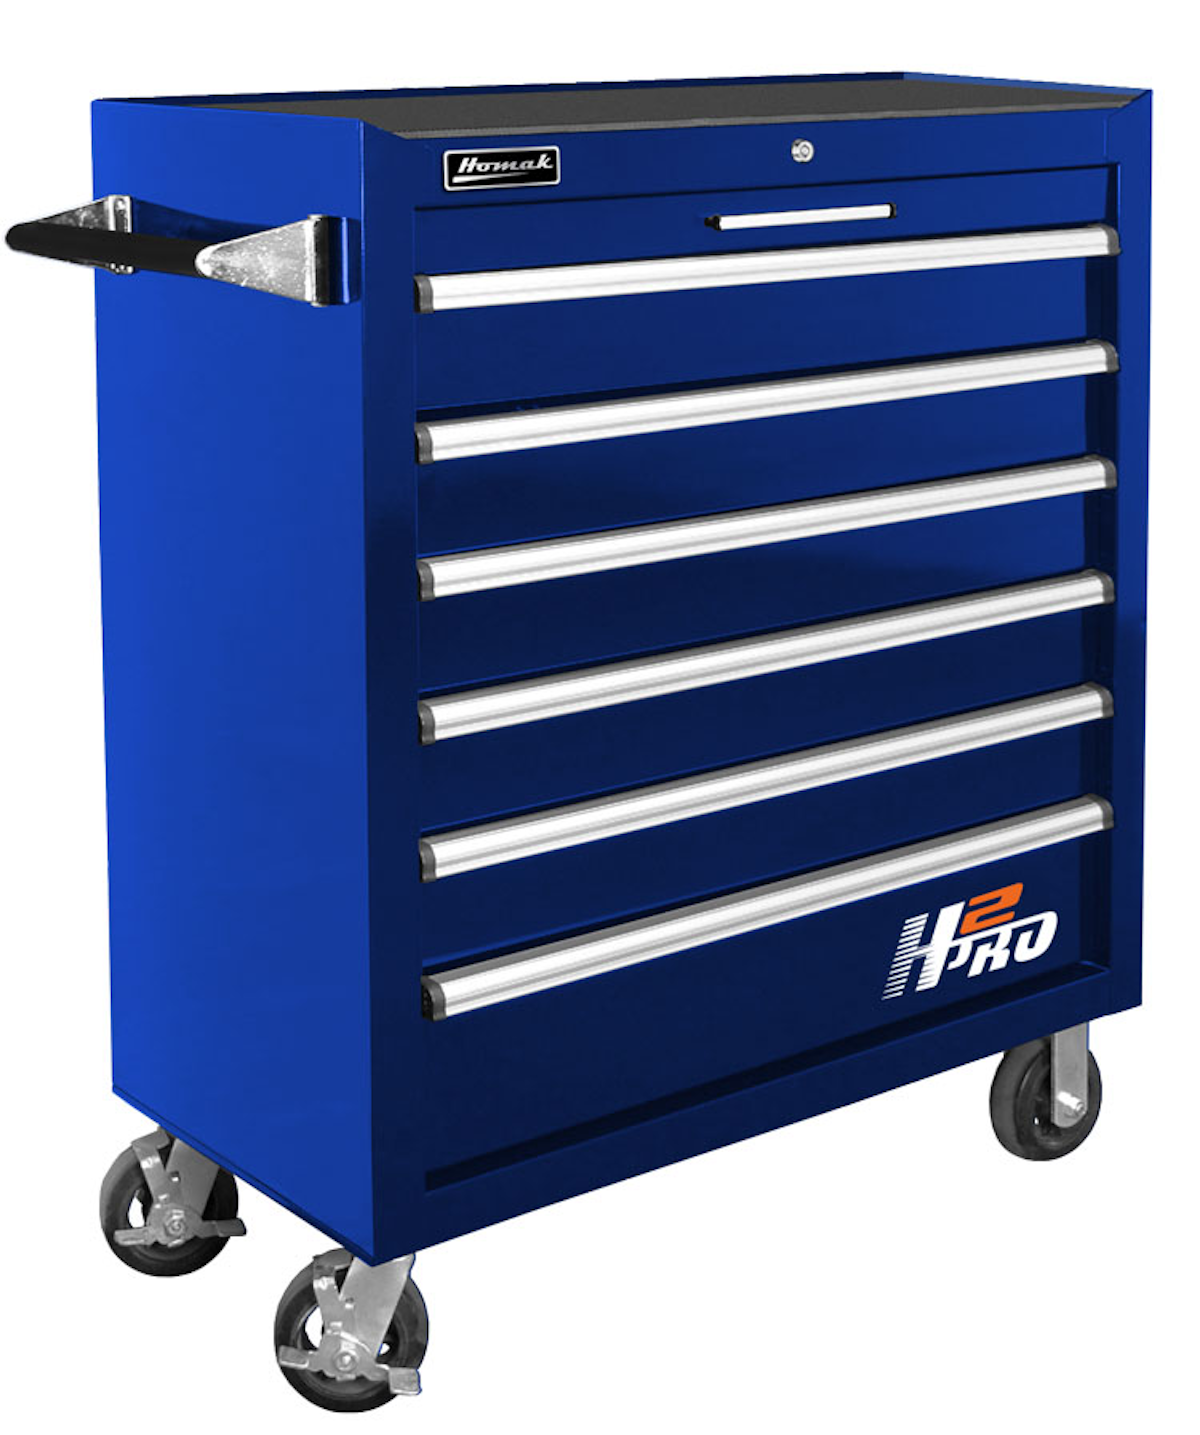 36 H2pro Series 6 Drawer Roller Cabinet From Homak Manufacturing